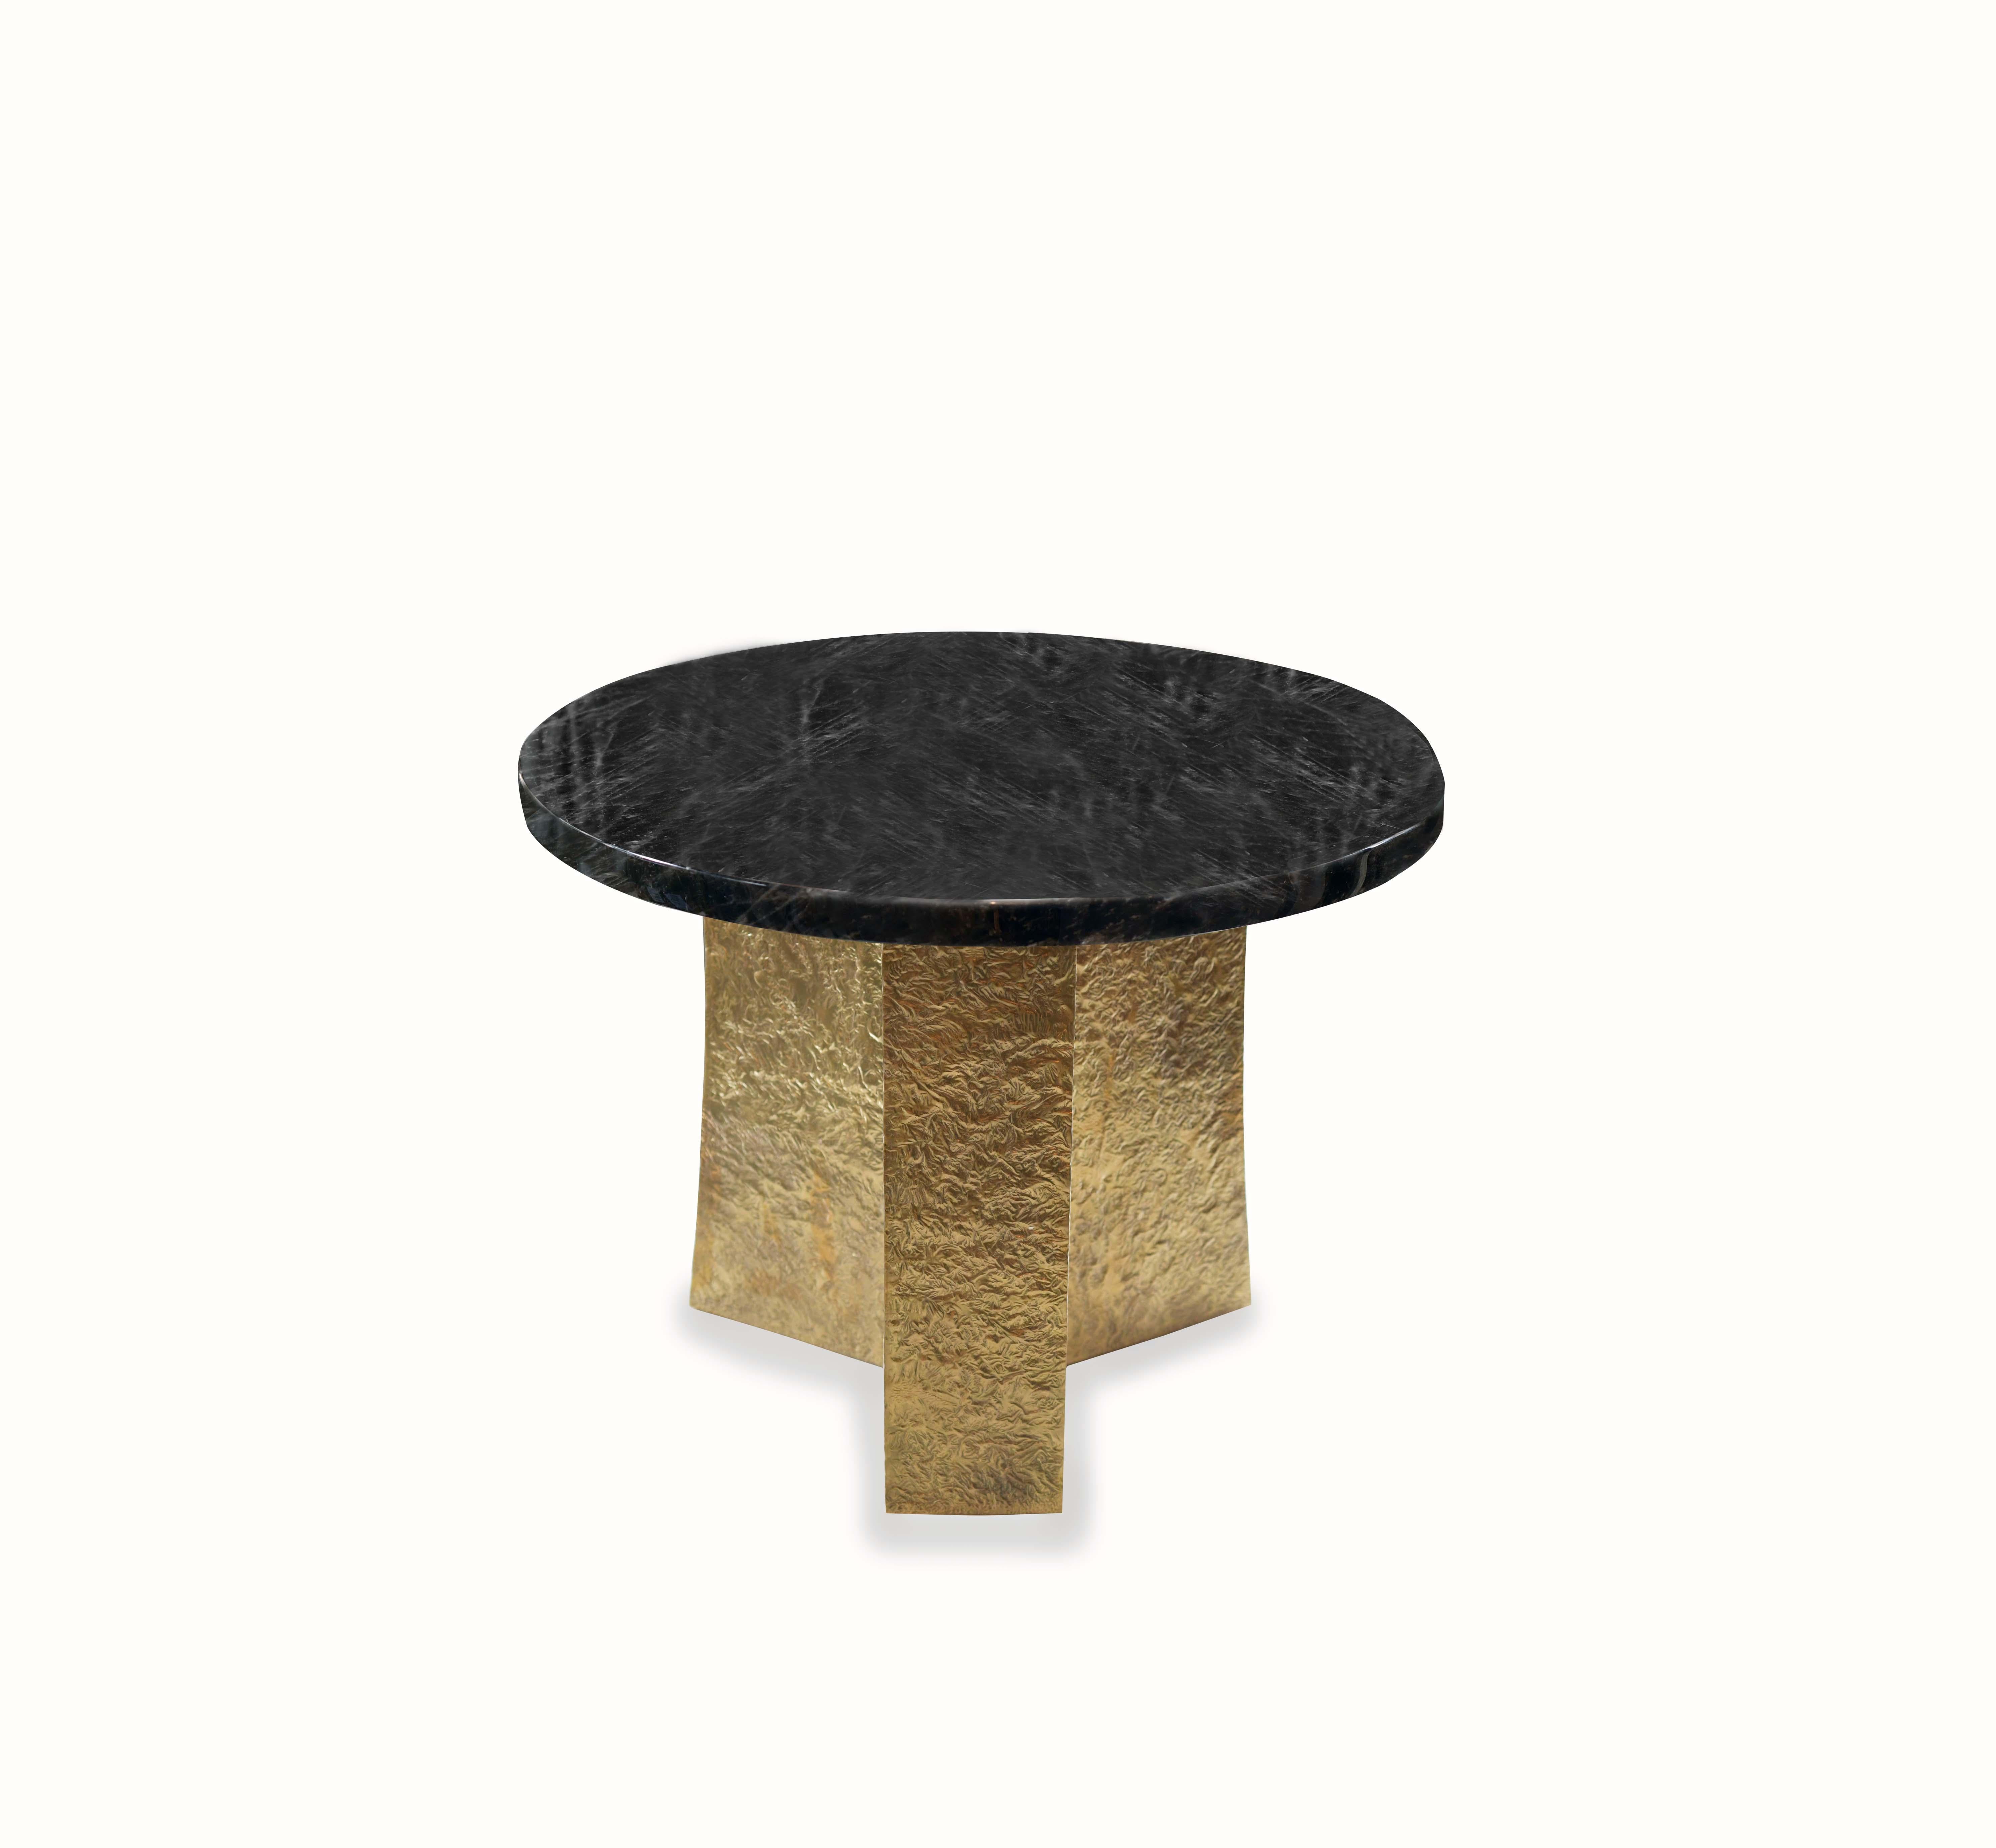 Tri plane table with hammered polish brass stand. Smoky dark
Rock crystal top. Created by Phoenix Gallery.
Custom size and finish upon request.